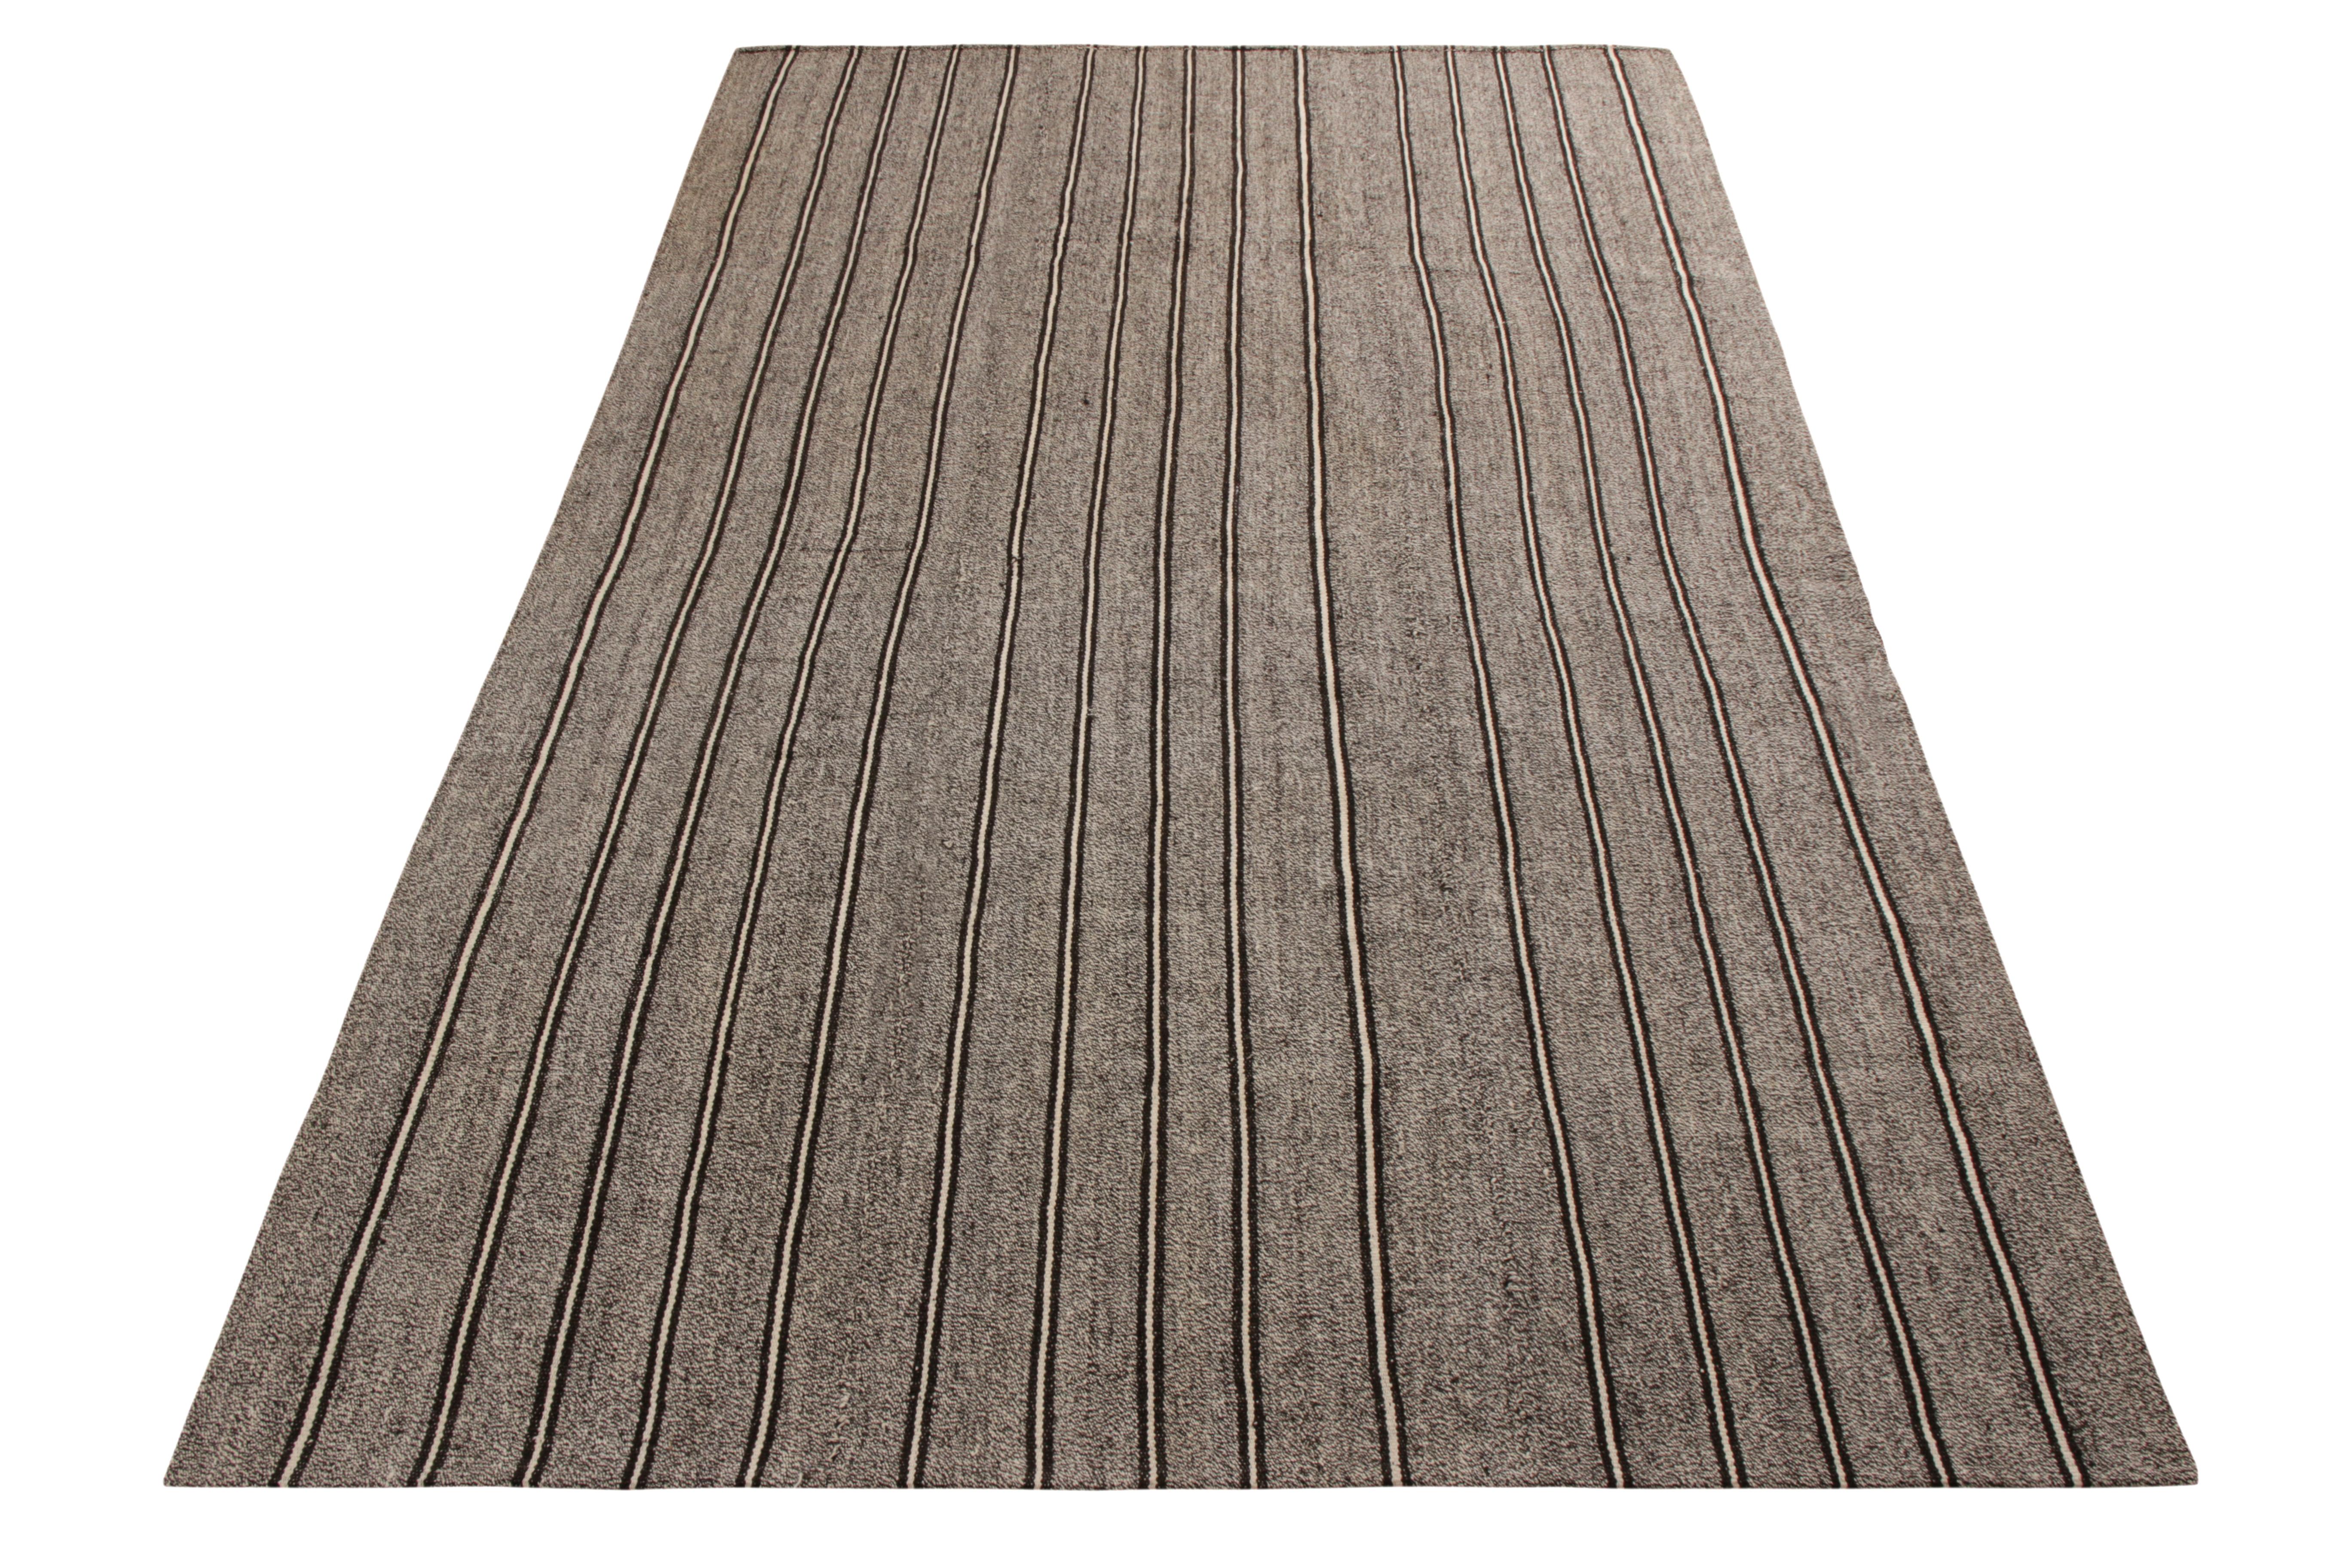 A vintage 5x7 Kilim rug in handwoven wool, originating from Turkey circa 1950-1960. Enjoying a forgiving, versatile gray with black and white stripes, connoting a sought-after paneled weaving style among mid-century Kilims. Further enjoying good